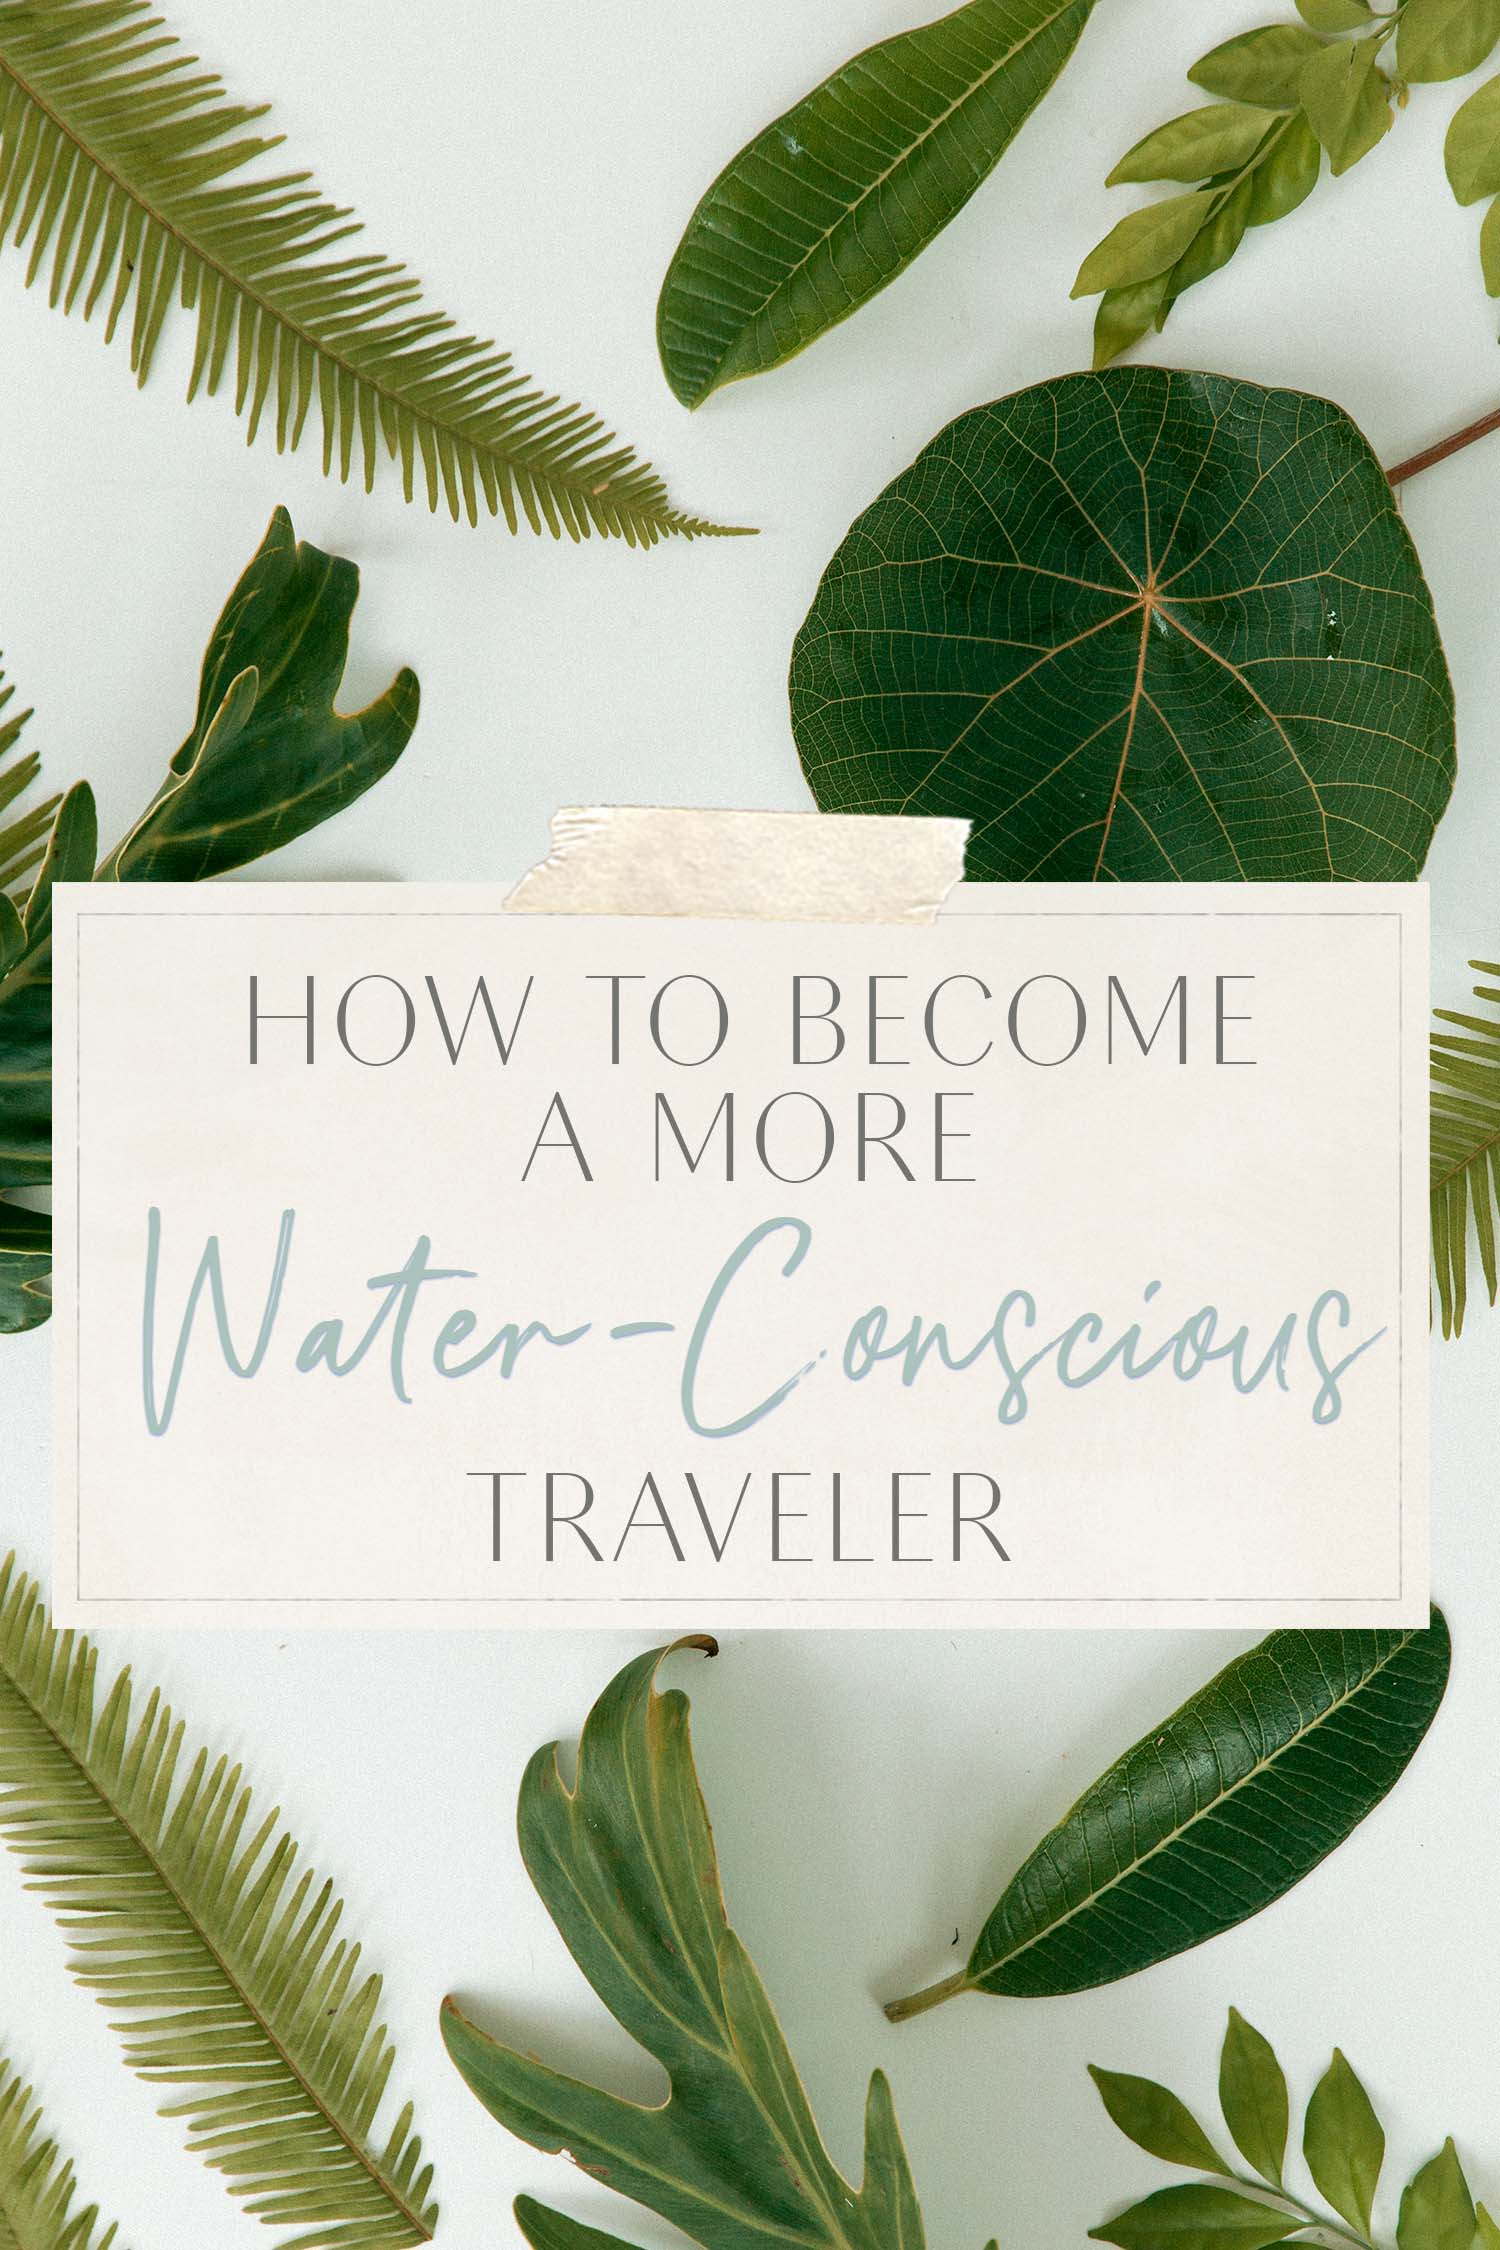 How to Become More Water Conscious Traveler